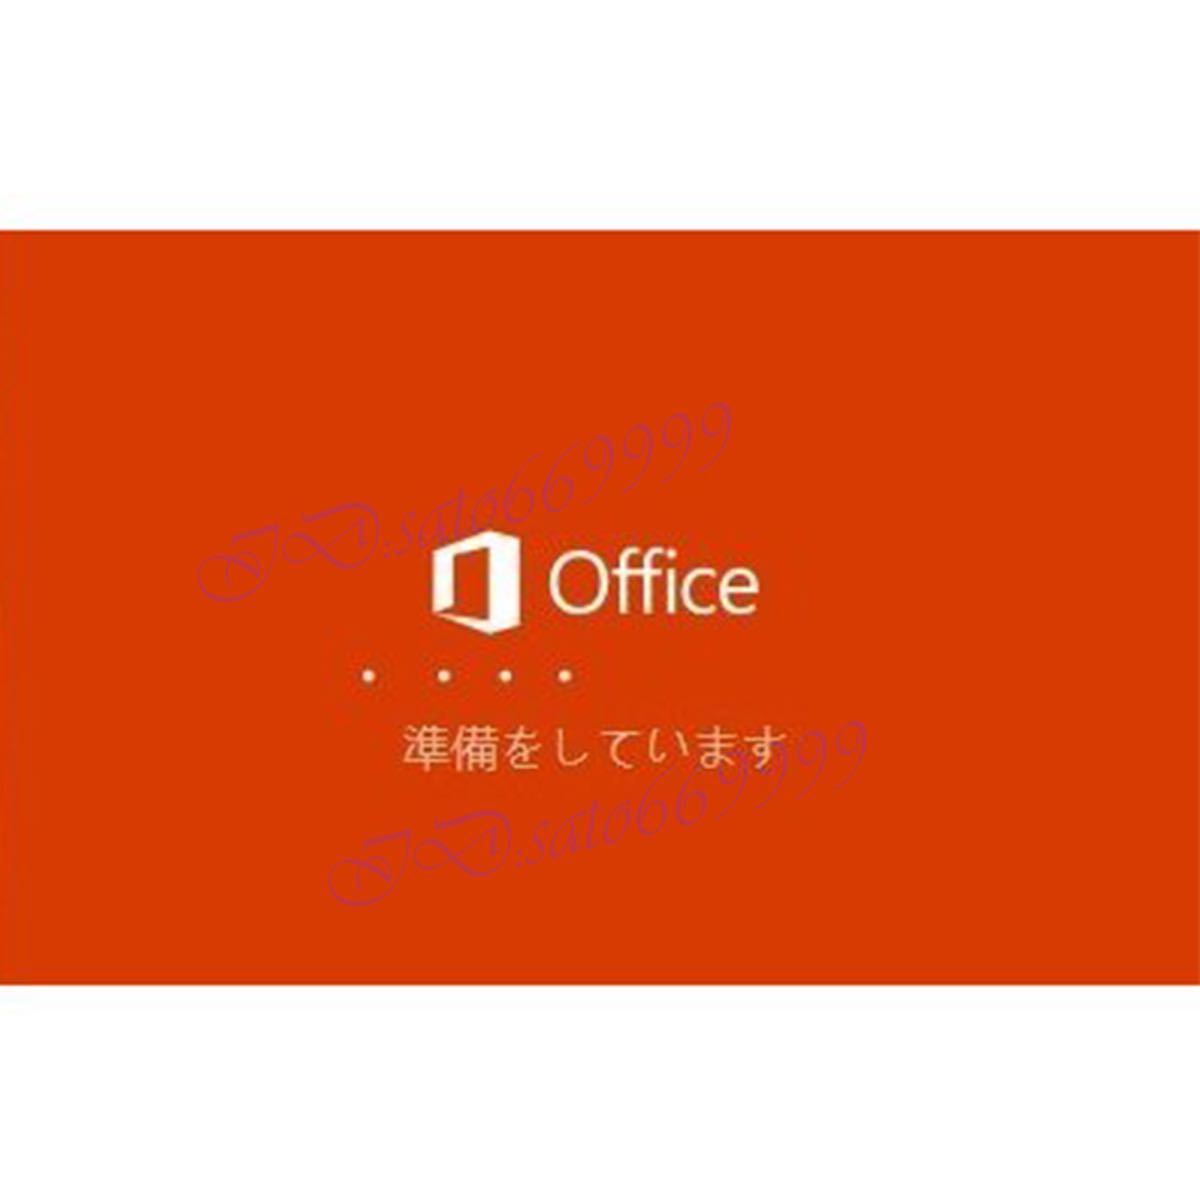 [ limitation sale campaign middle ]Microsoft Office2021 Pro duct key Professional Plus office 2021 regular Pro duct key Word Excel